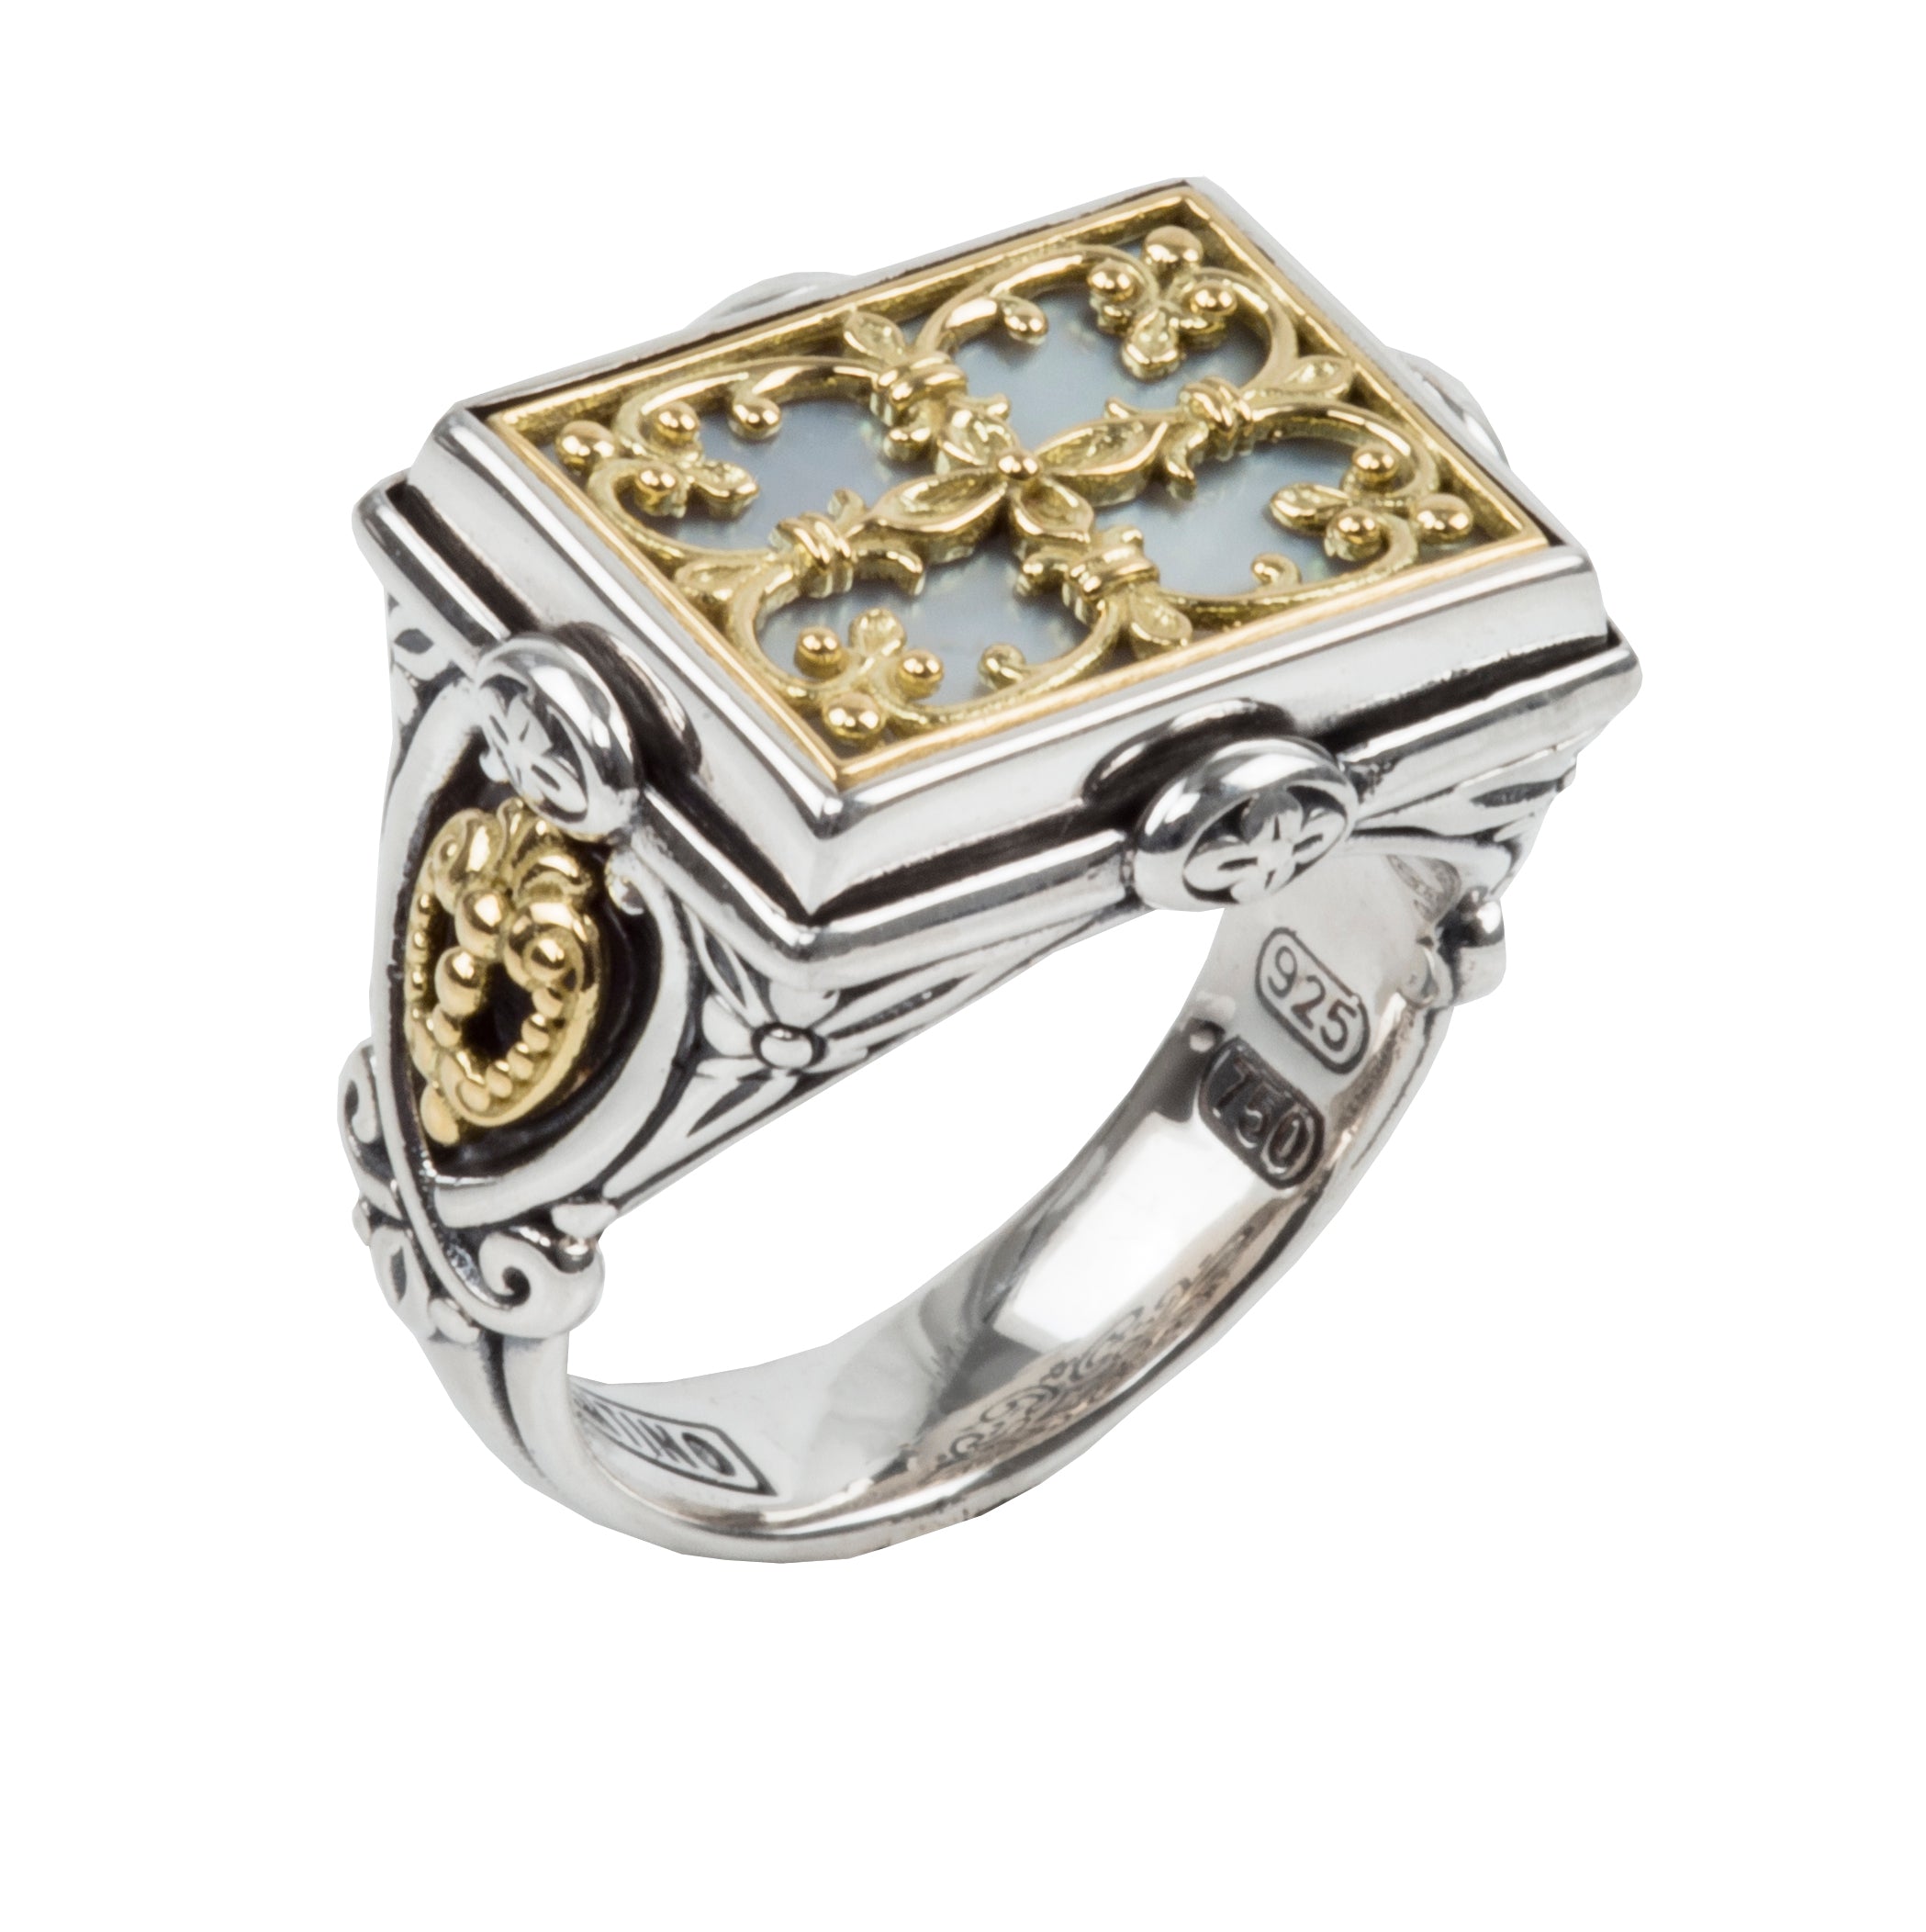 KONSTANTINO STERLING SILVER AND 18K YELLOW GOLD MOTHER OF PEARL RING FROM THE HESTIA COLLECTION